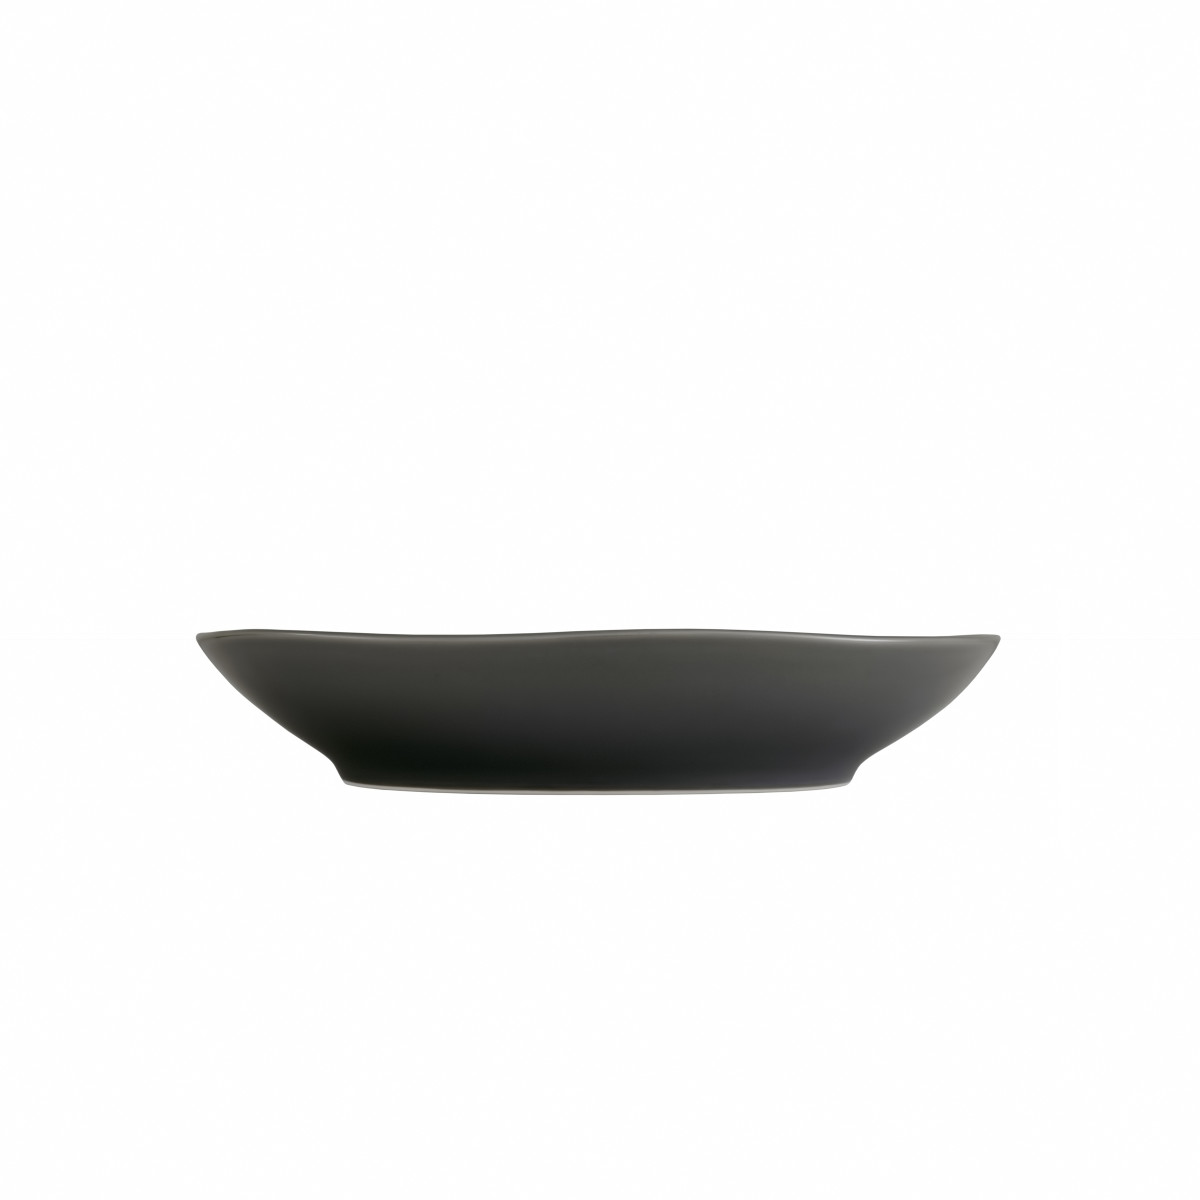 Heirloom Low Coupe Bowl, Charcoal, Set of 4